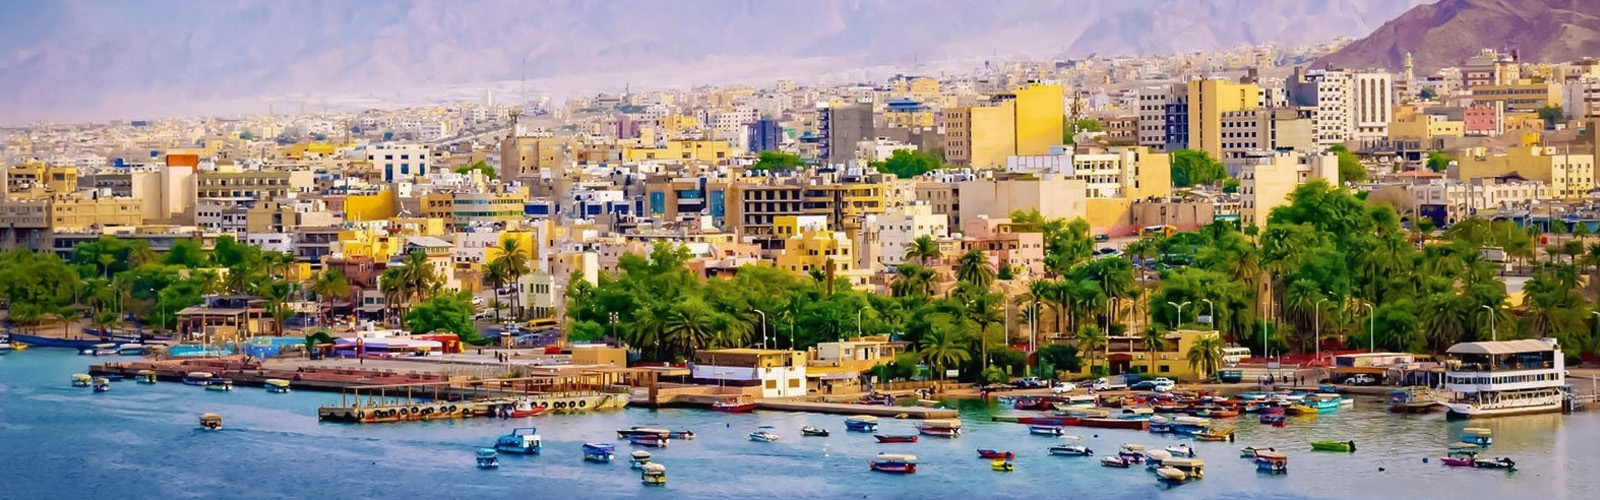 things to do in aqaba